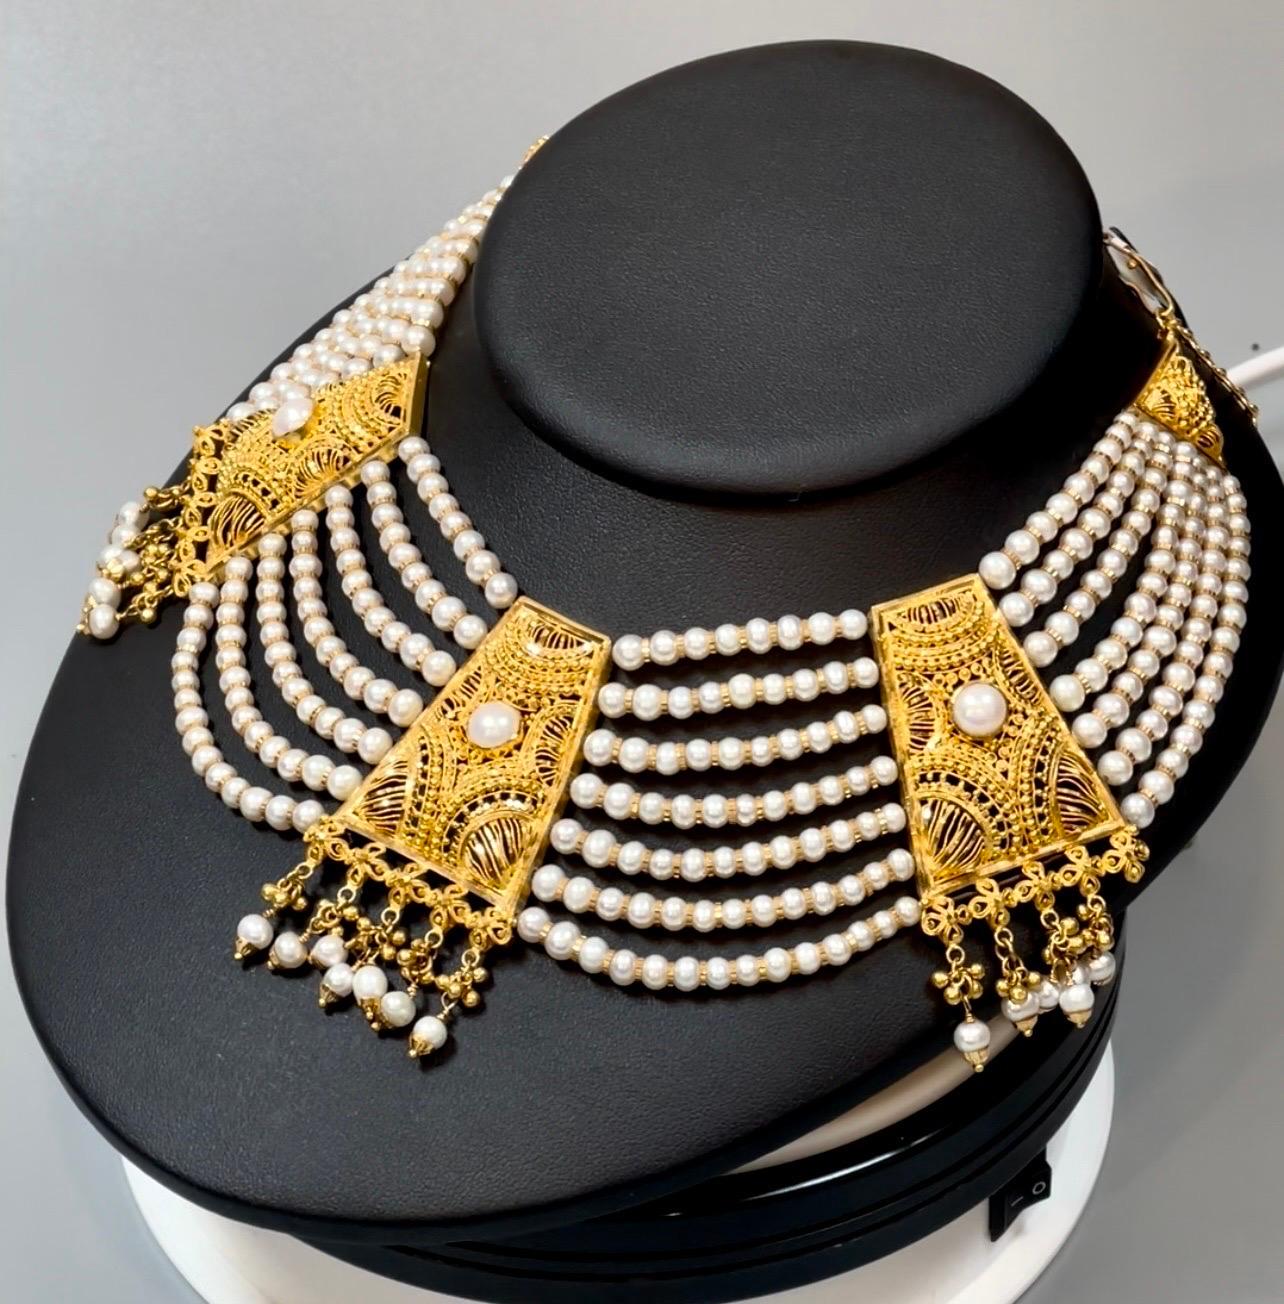 22 Karat Gold and Pearl Multi Layer Necklace Bridal Princess Necklace 3